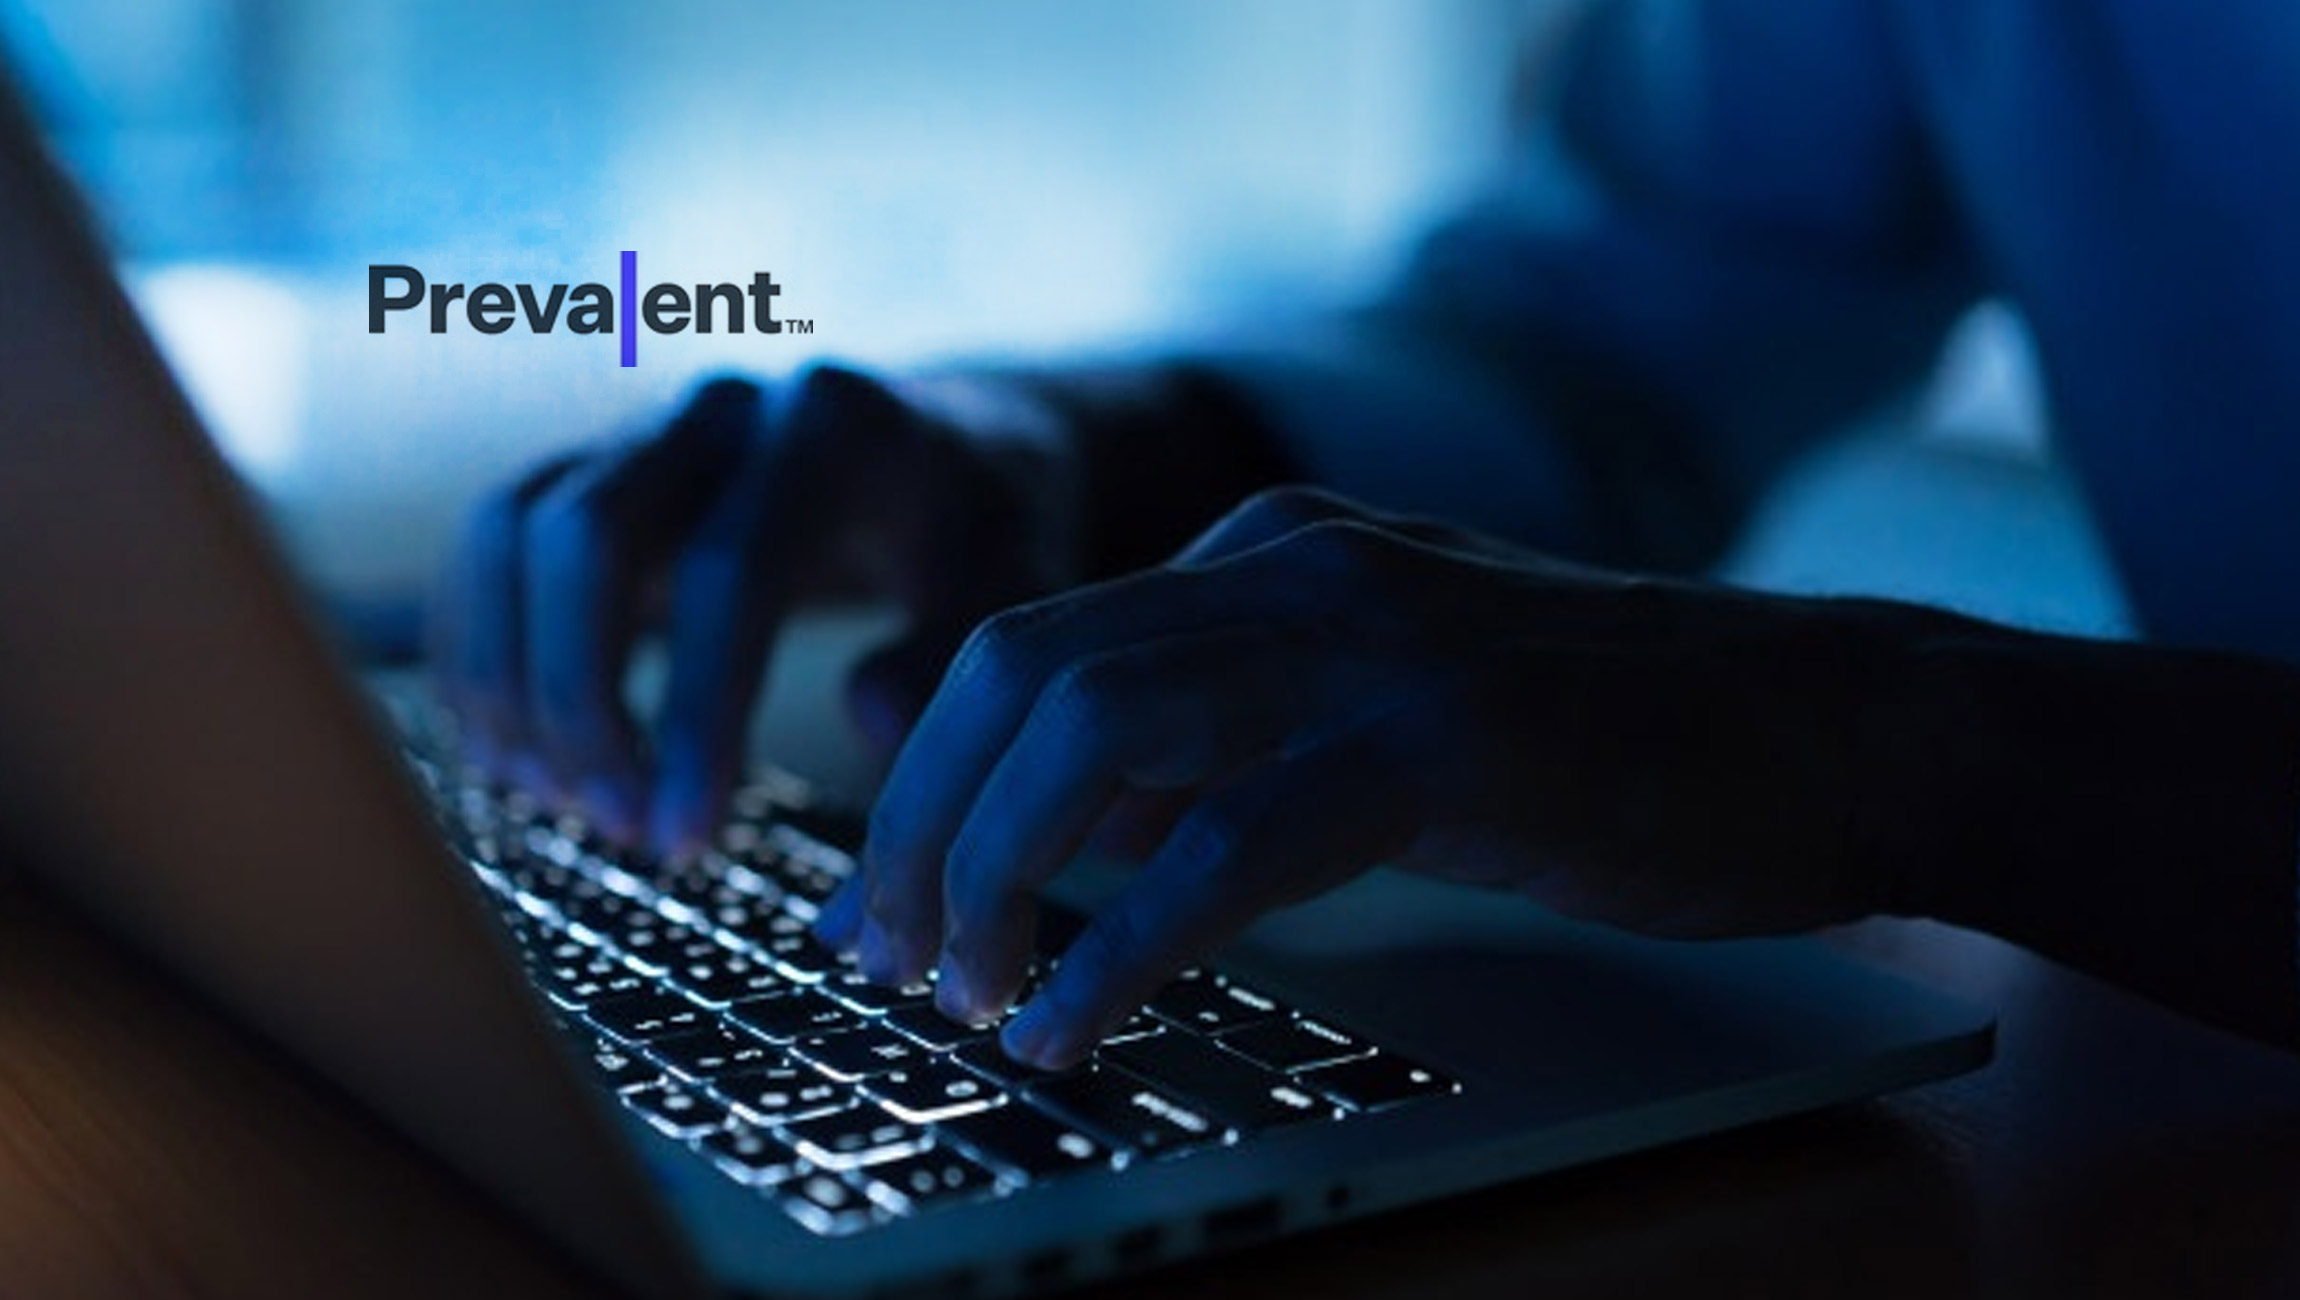 Prevalent Expands Industry-Leading Third-Party Risk Management Platform to Further Increase Automation and Productivity